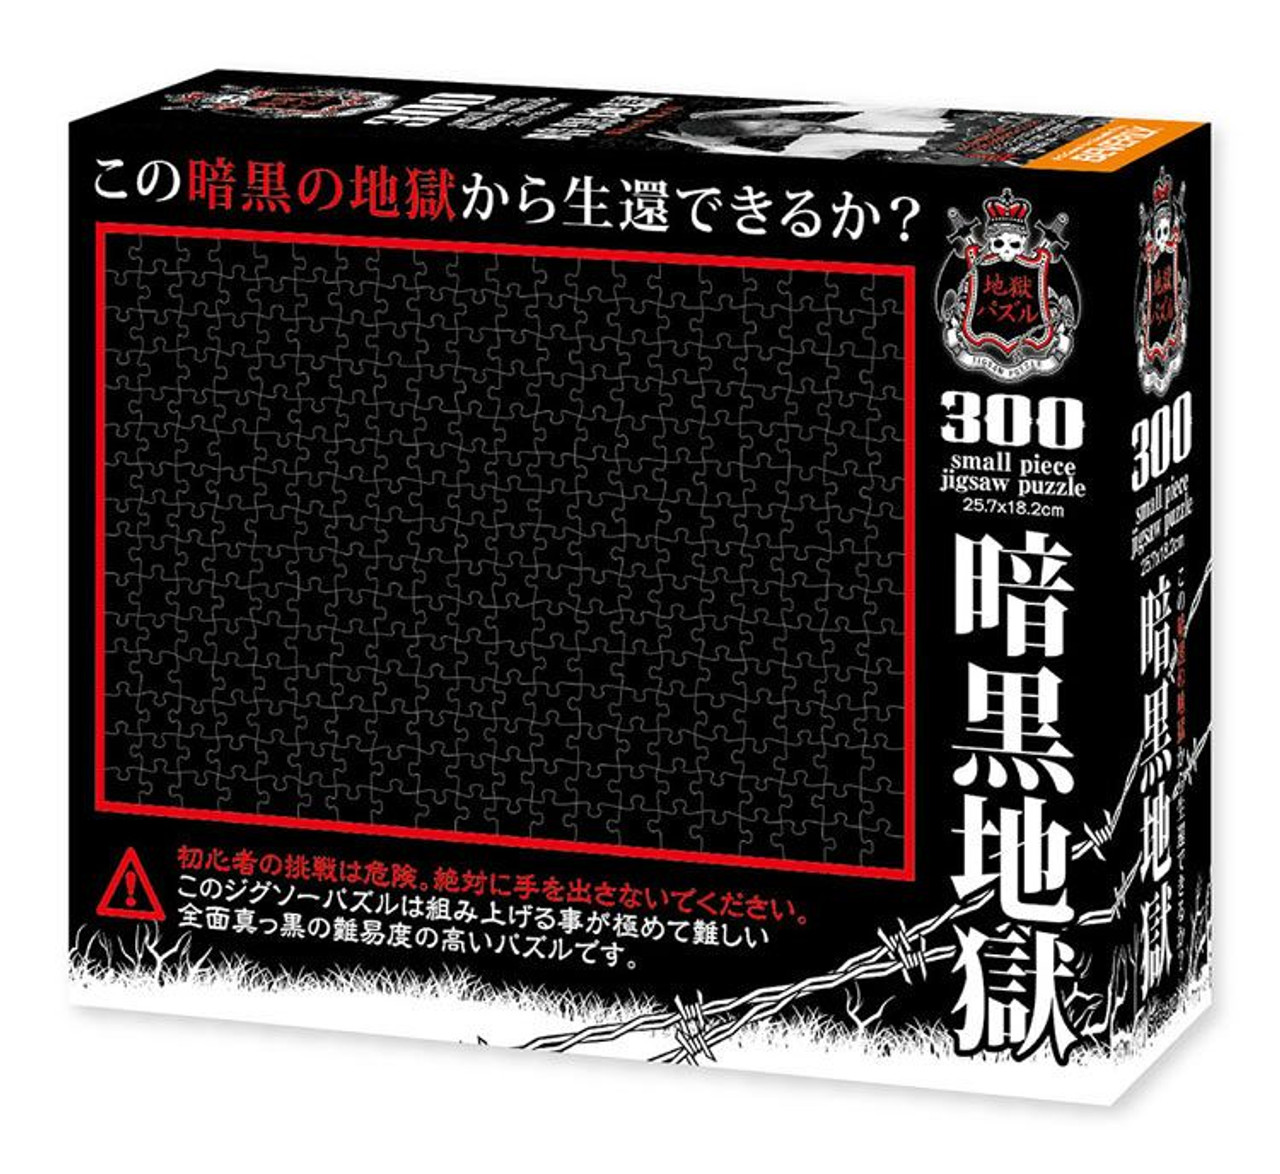 Jigsaw Puzzle All Black Jigsaw (The Hell Puzzle) PlazaJapan